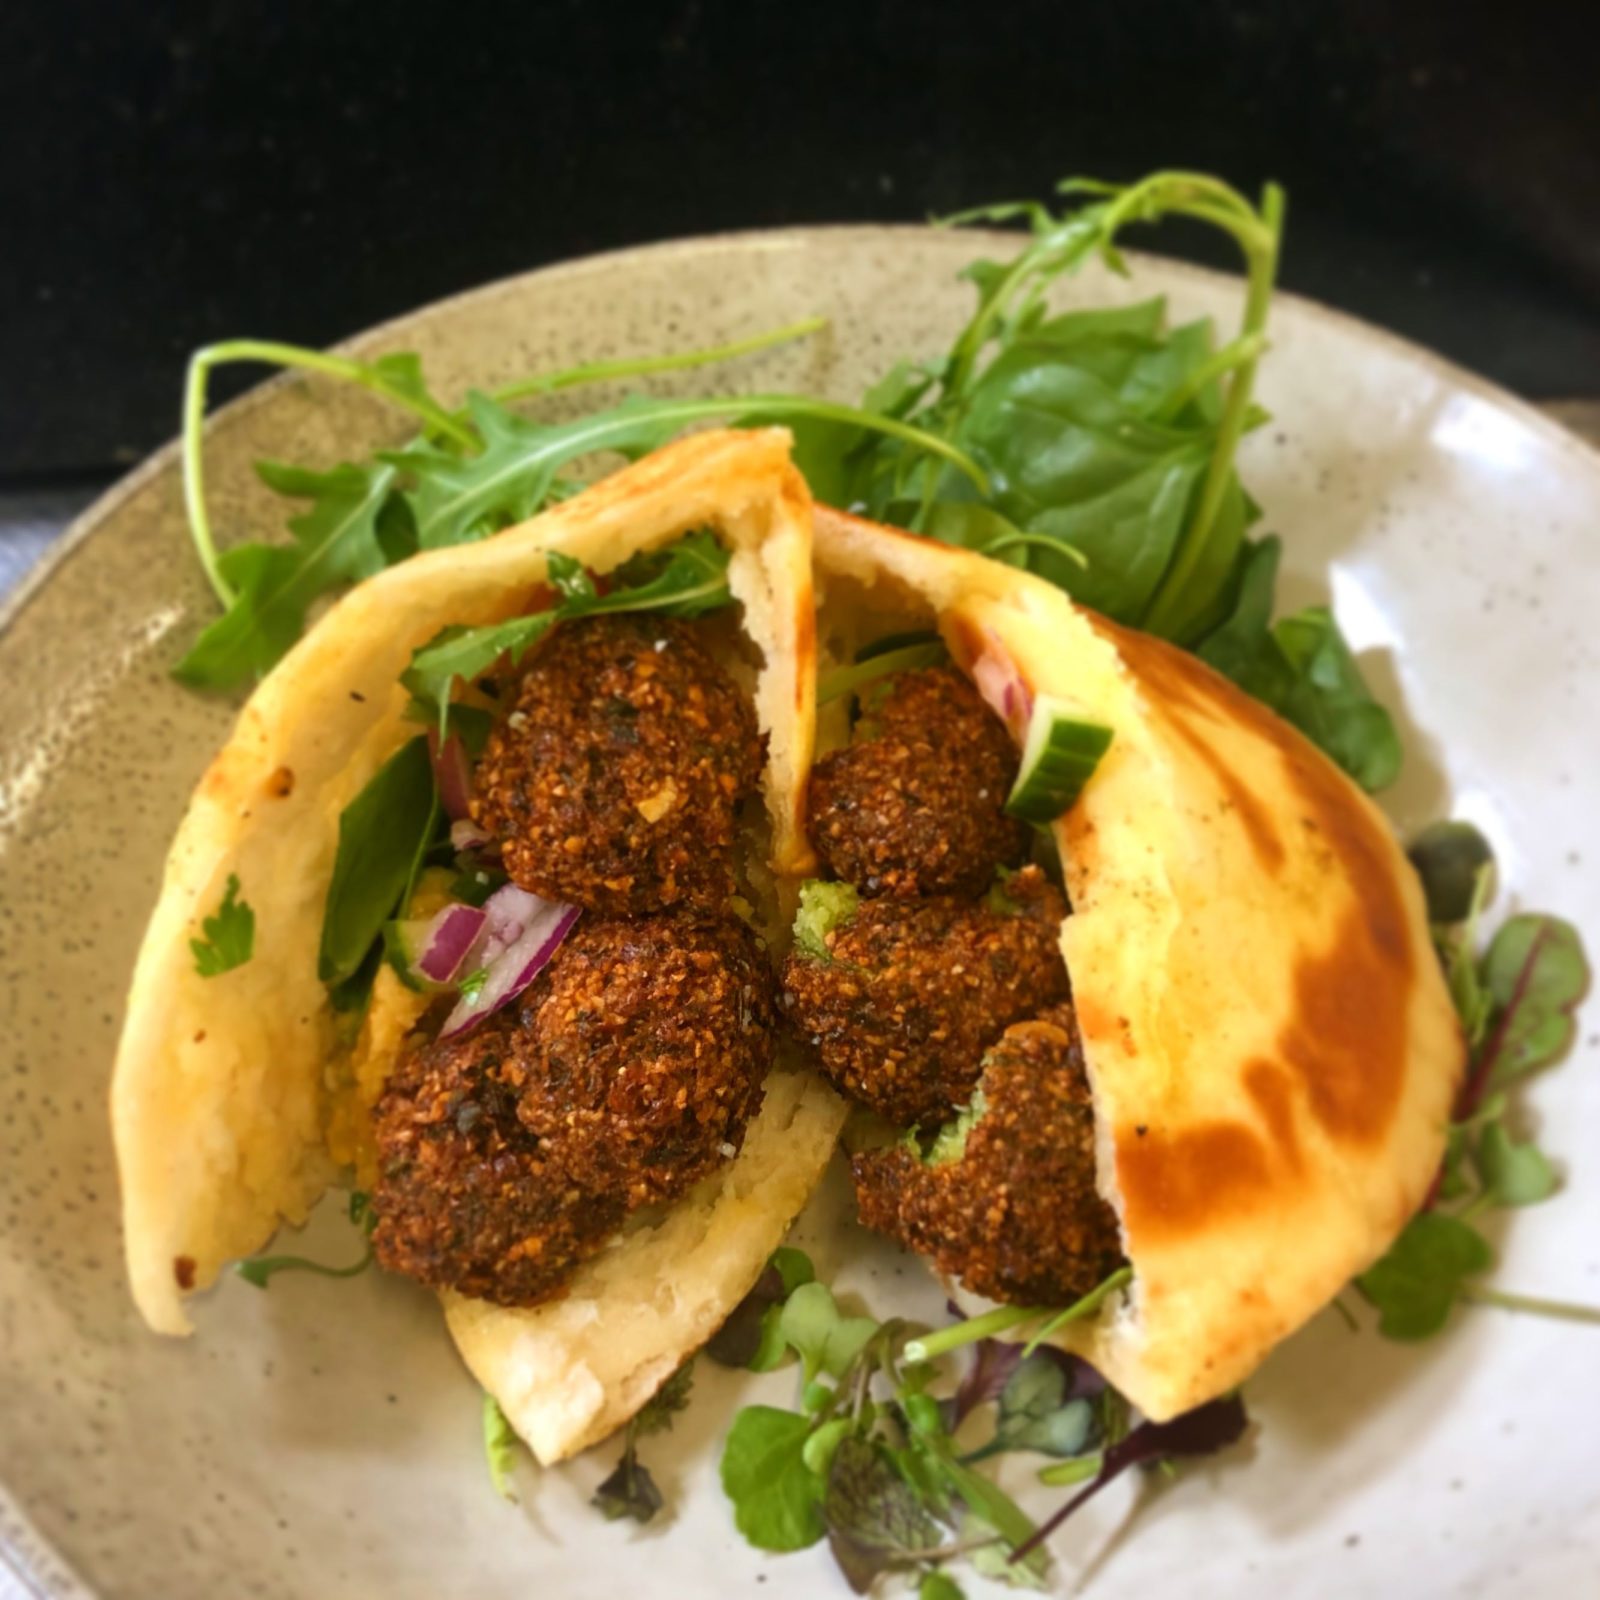 We make everything from scratch including our delicious vegan falafel & hummus